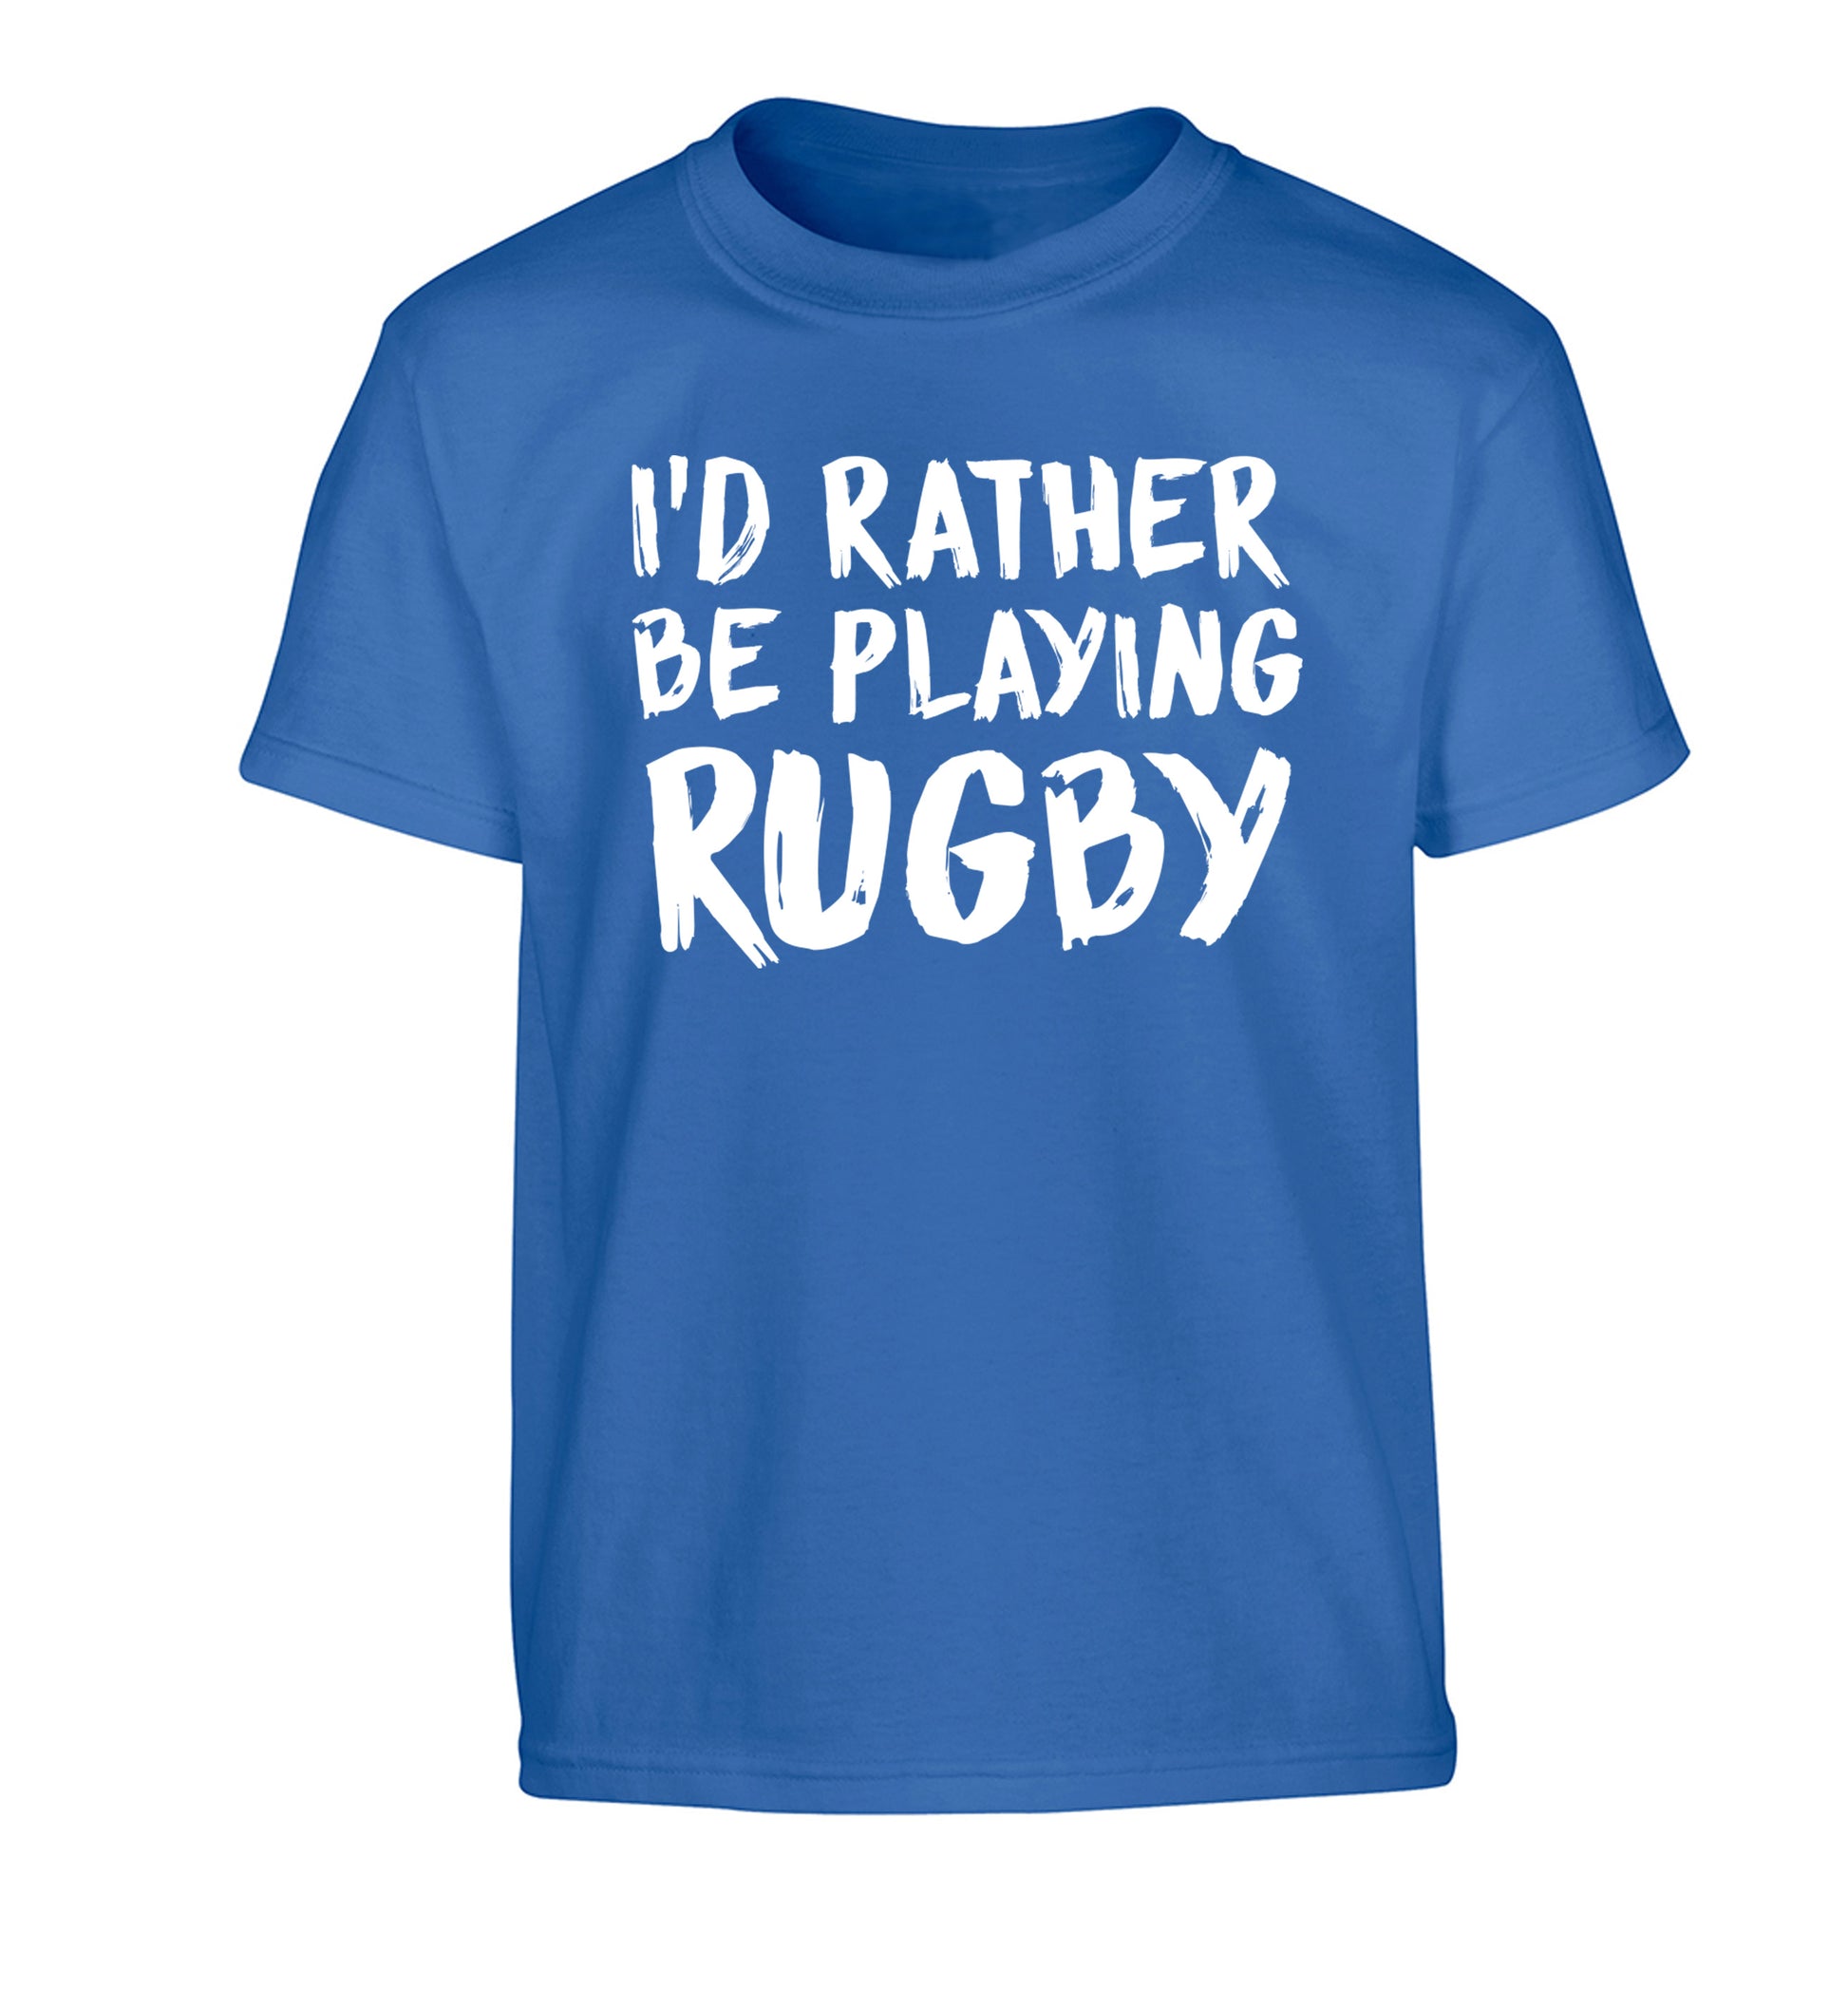 I'd rather be playing rugby Children's blue Tshirt 12-13 Years